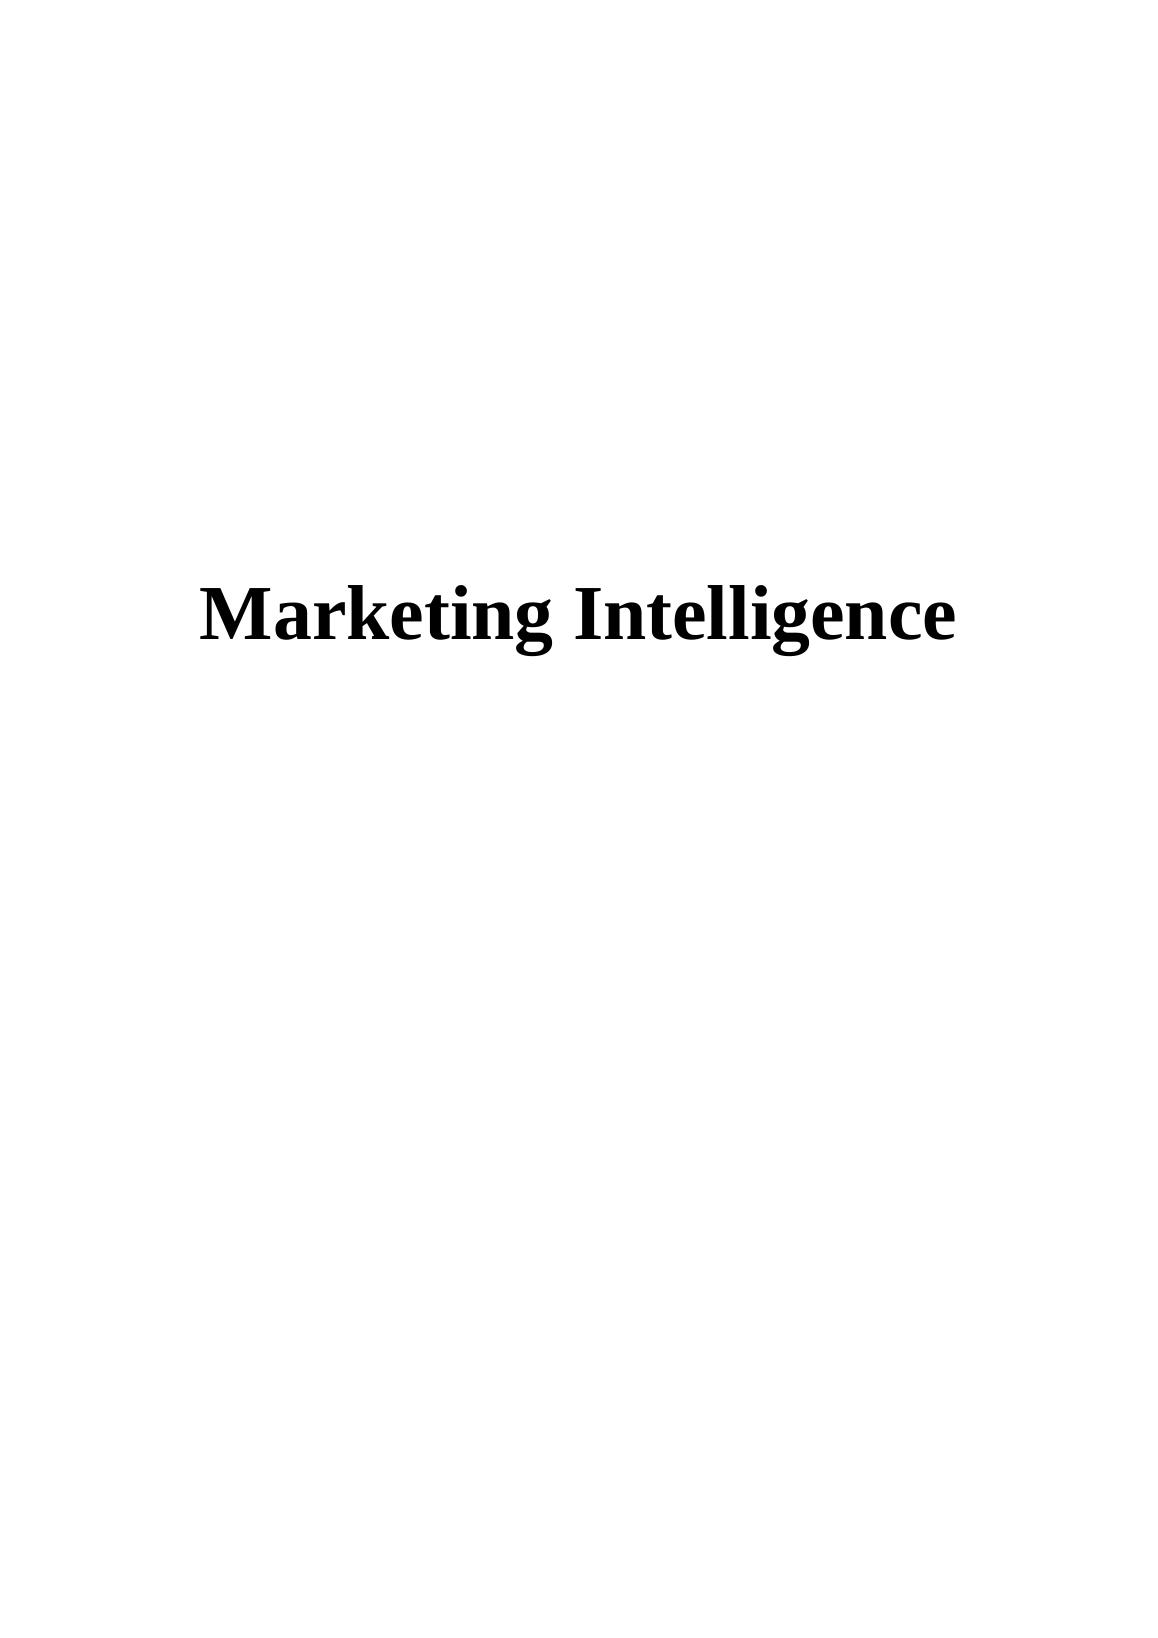 Marketing Intelligence Assignment | Purchase Decision-Making Process_1